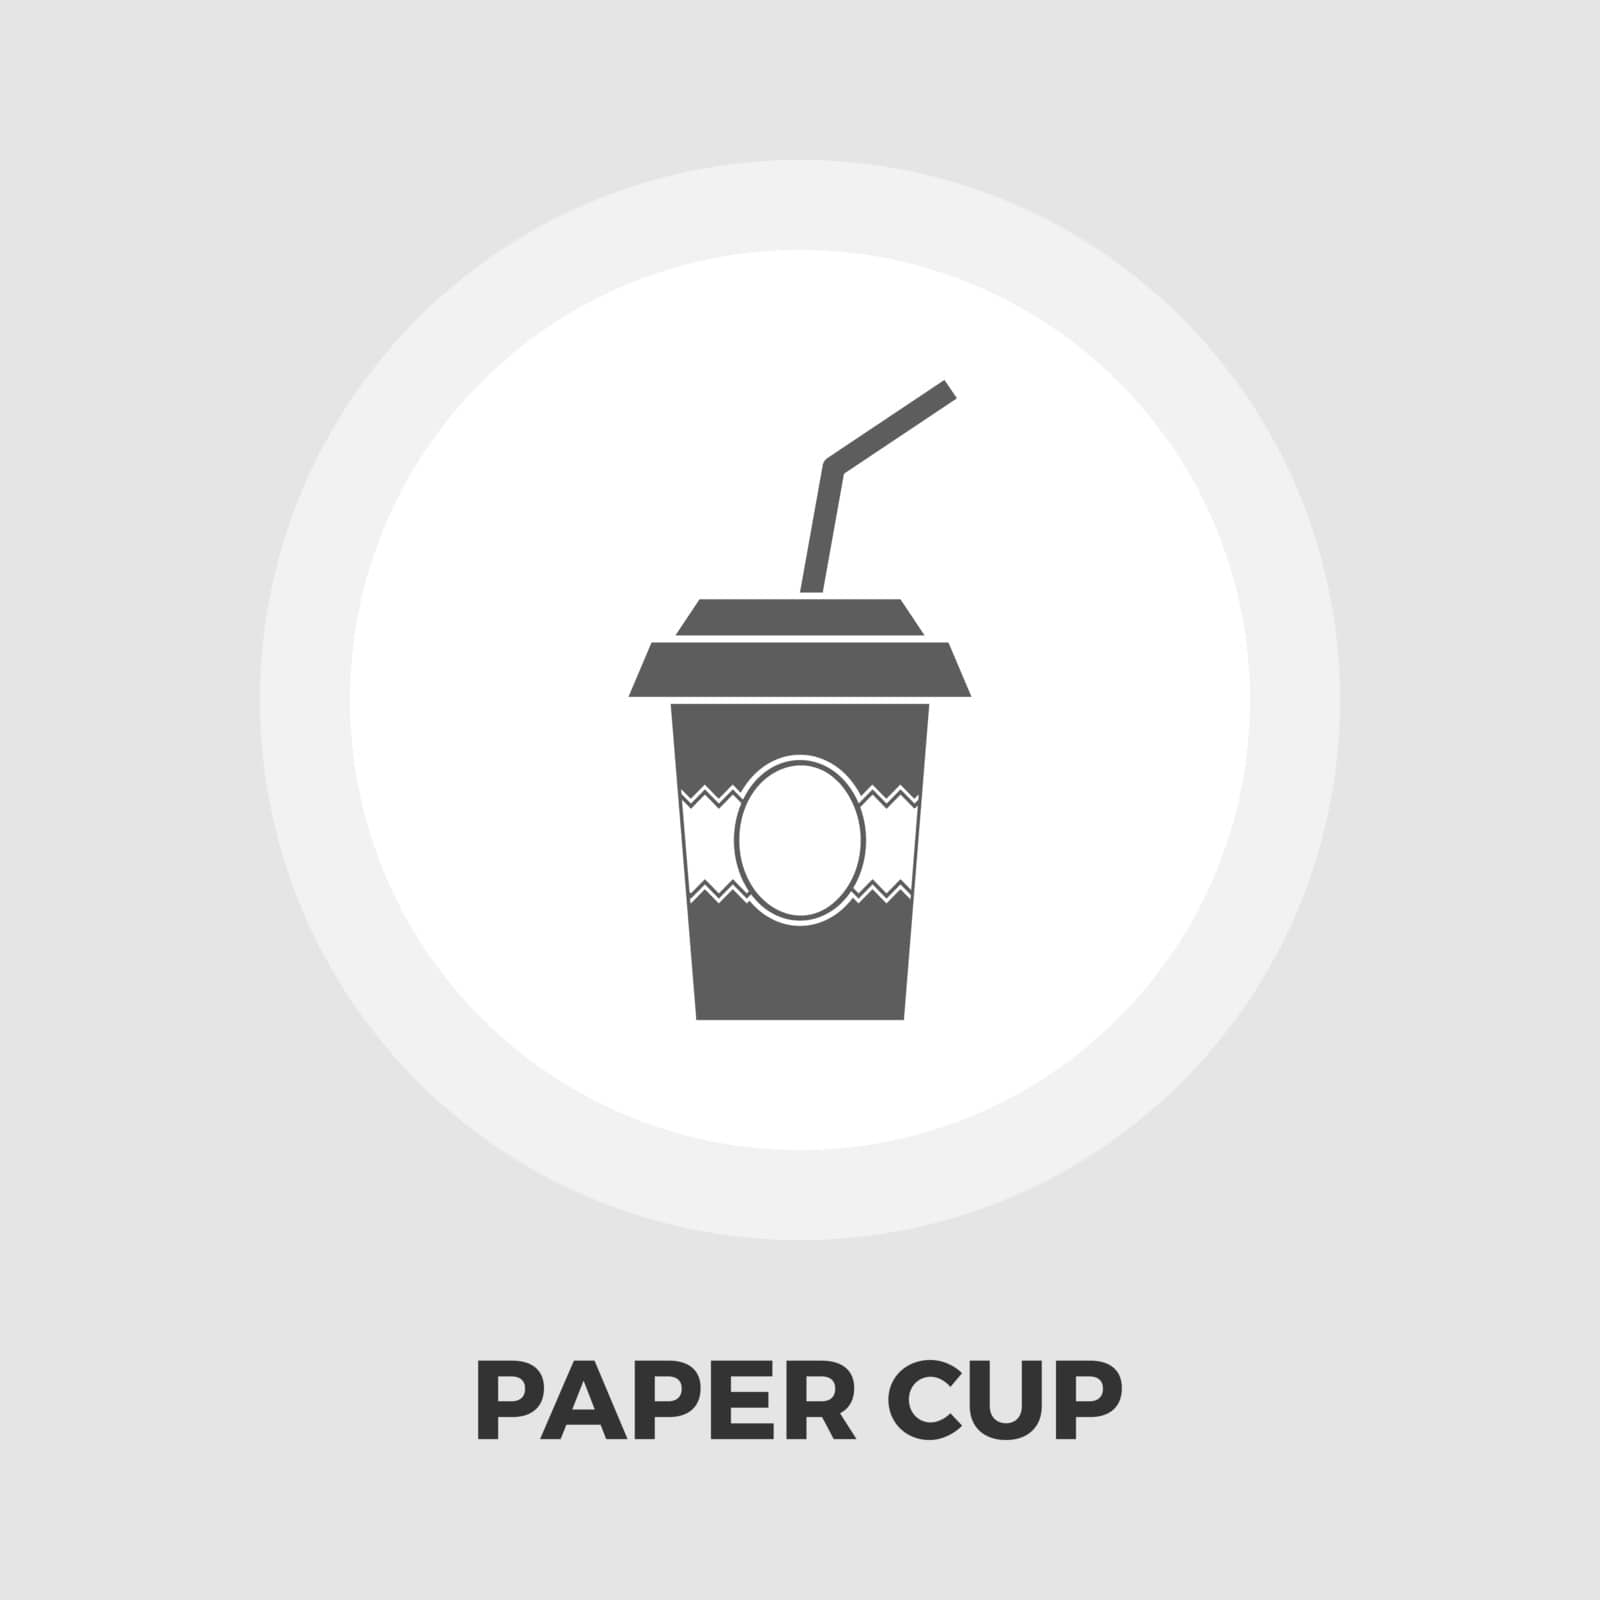 Paper fast food cup icon vector. Flat icon isolated on the white background. Editable EPS file. Vector illustration.